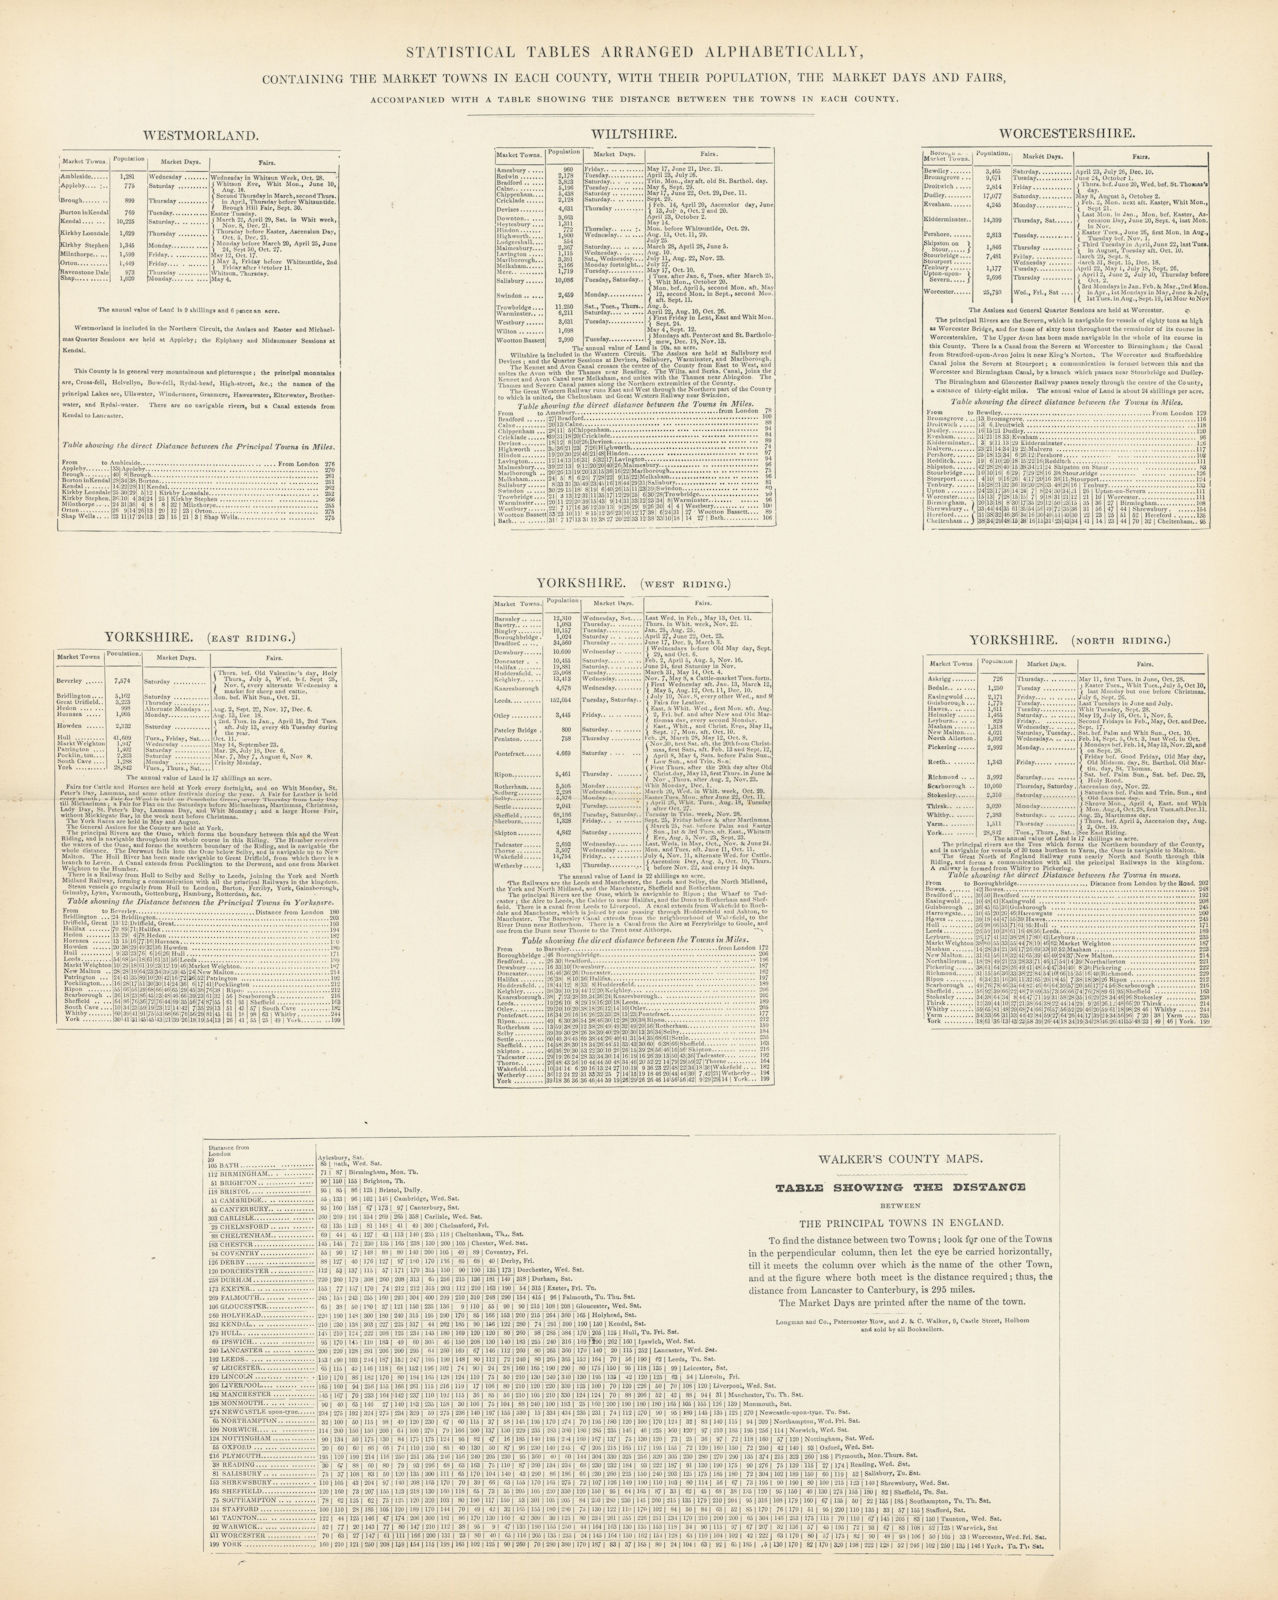 Associate Product Market Towns, days, fairs & population by county. Westmorland-Yorkshire 1870